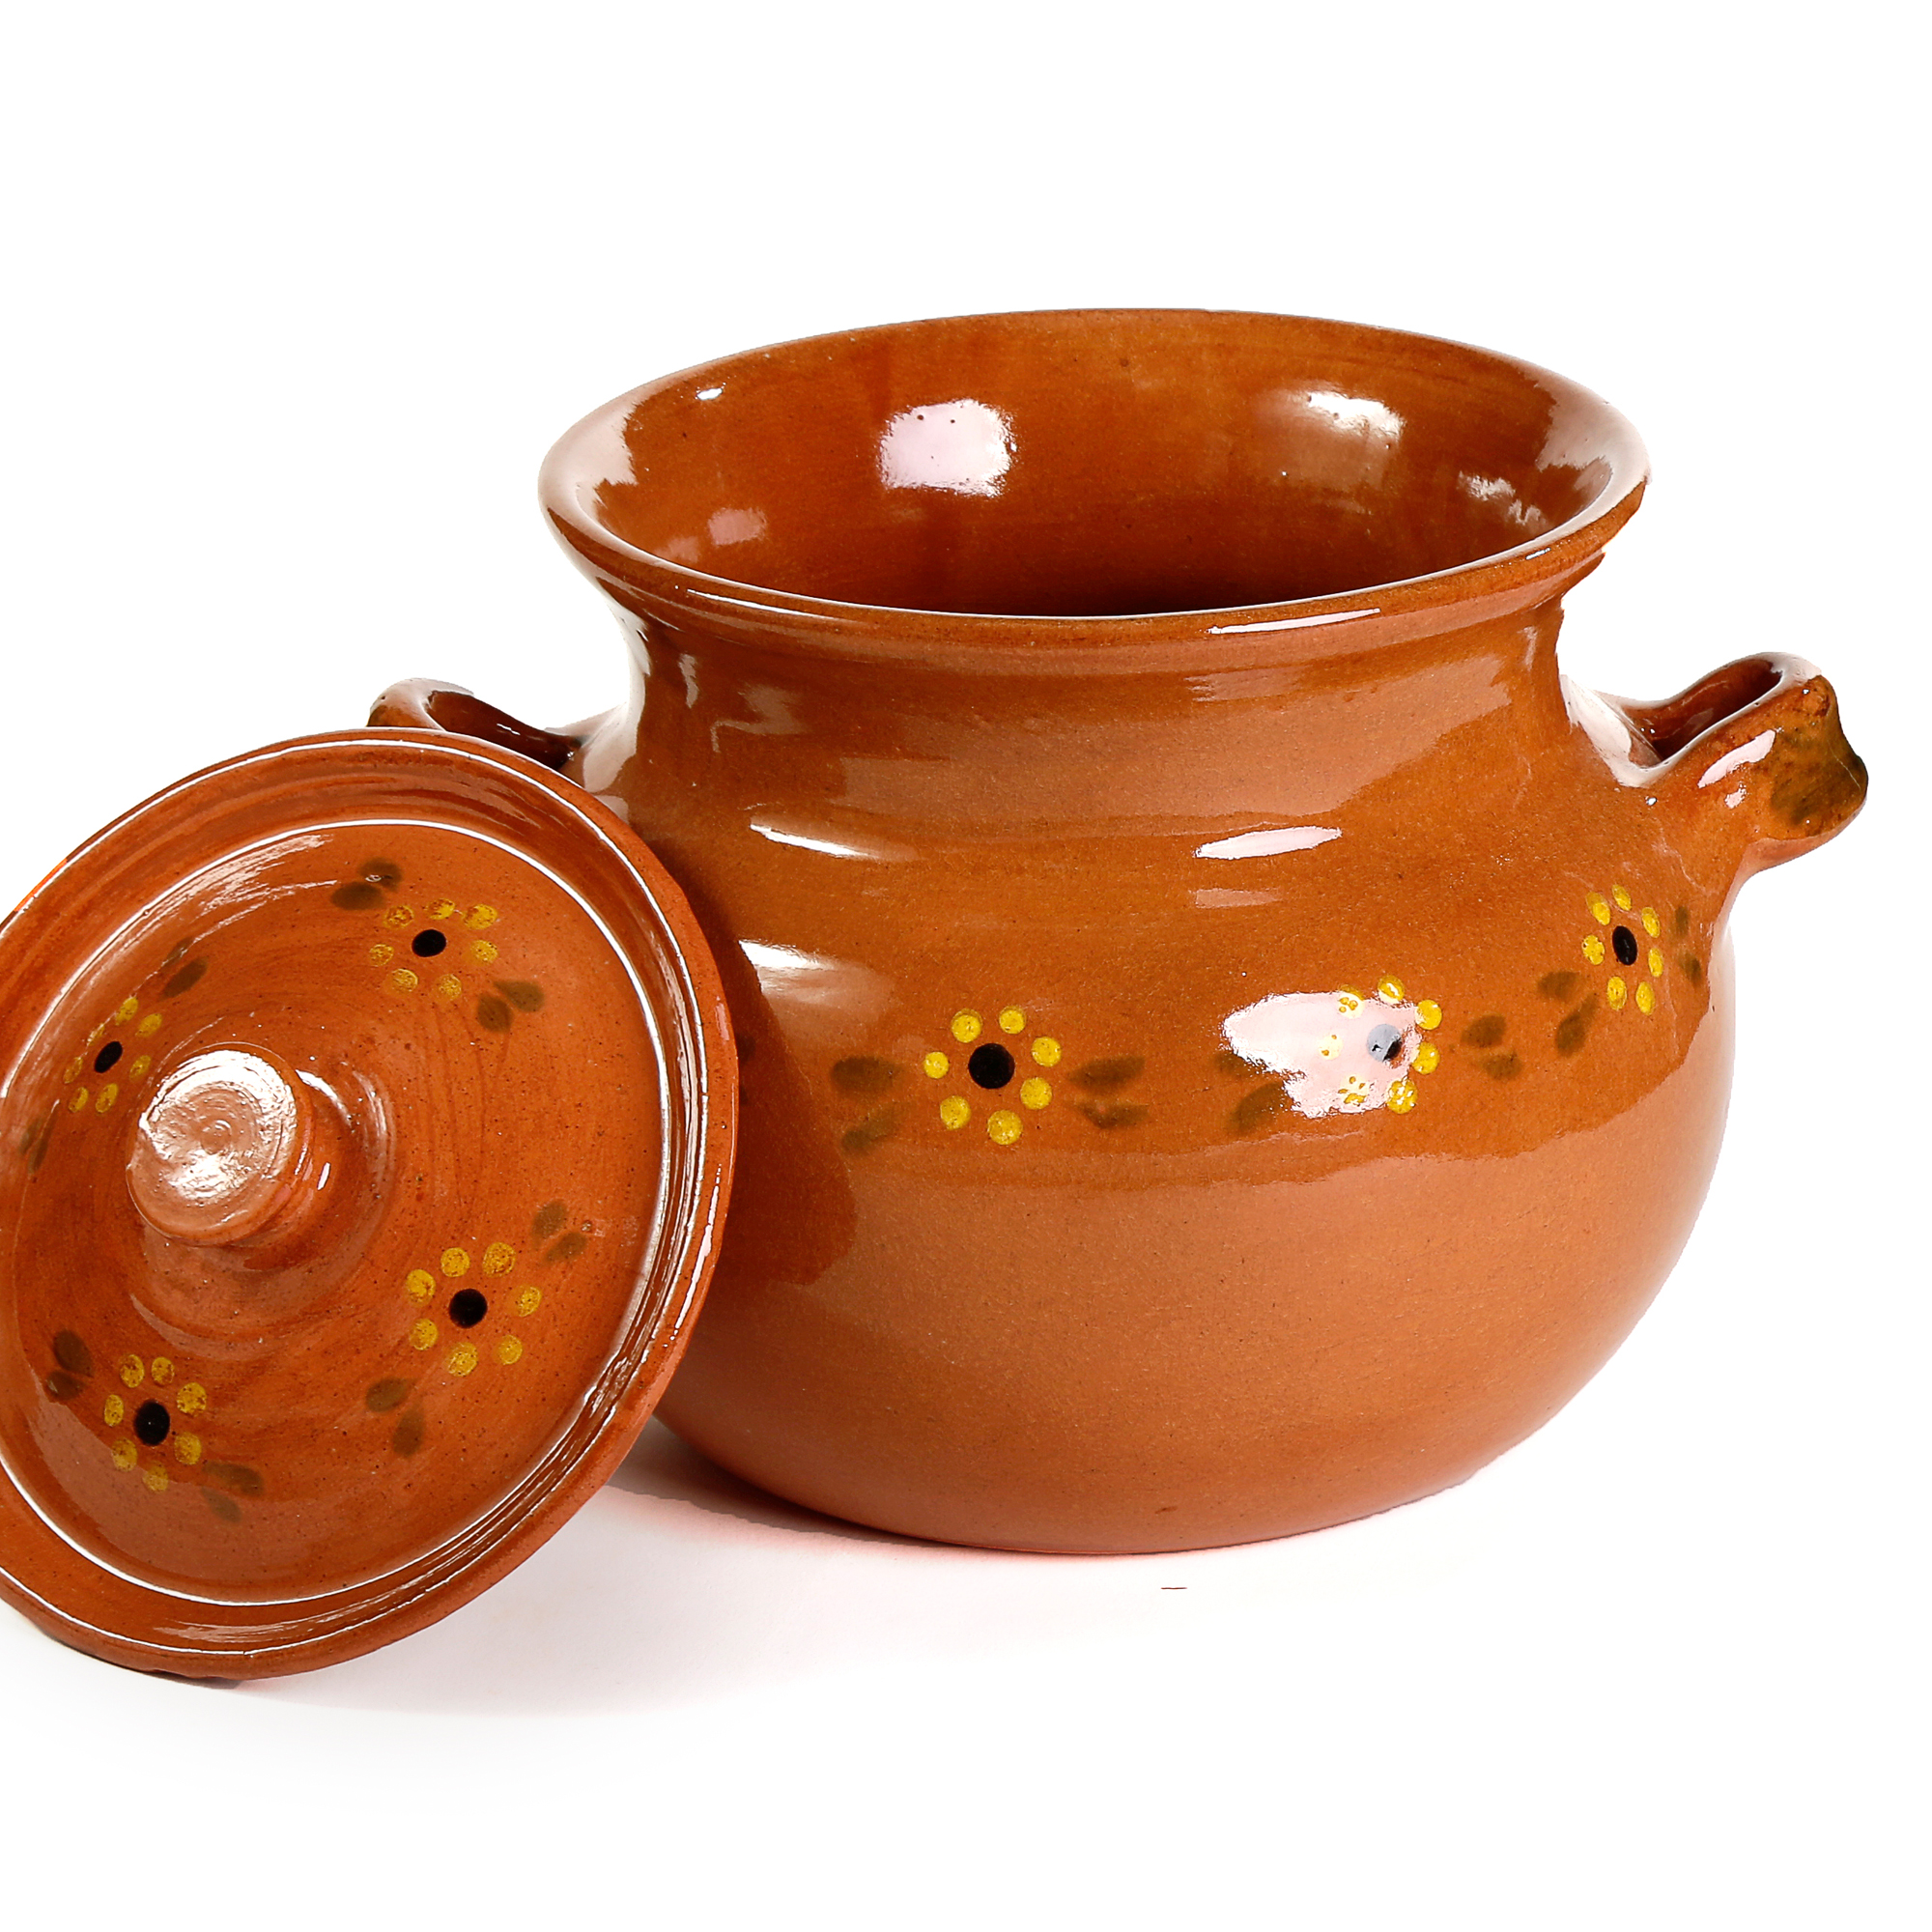 https://ancientcookware.com/images/stories/virtuemart/product/mex_3050_08_02_large.jpg